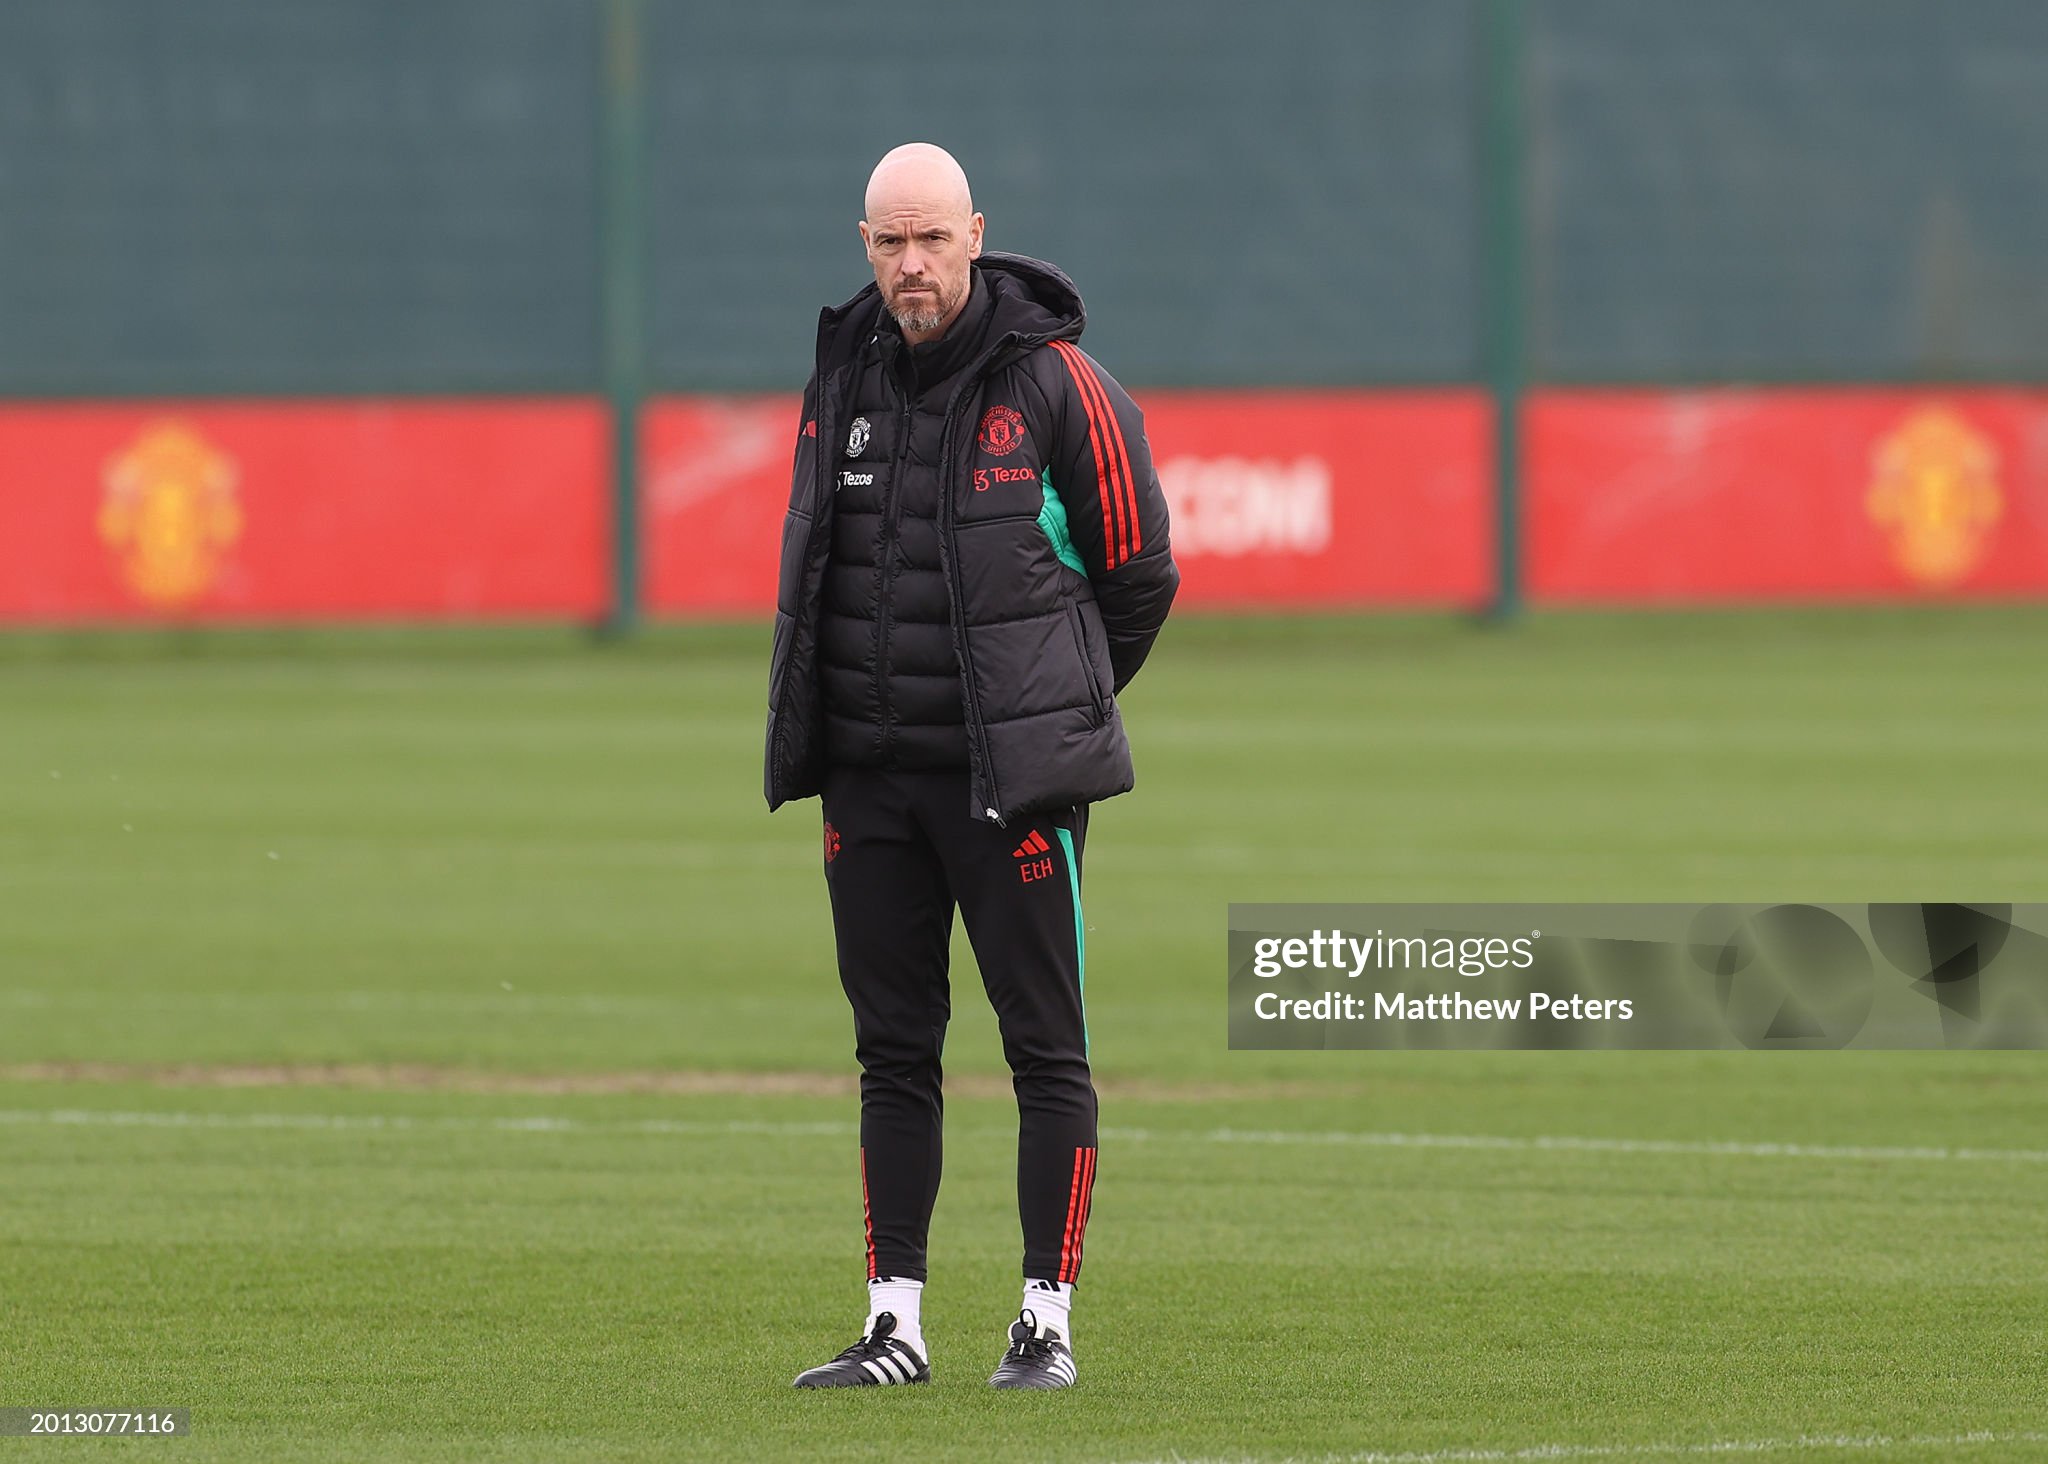 Ten Hag emphasizes: 'Ratcliffe and I are on the same page'